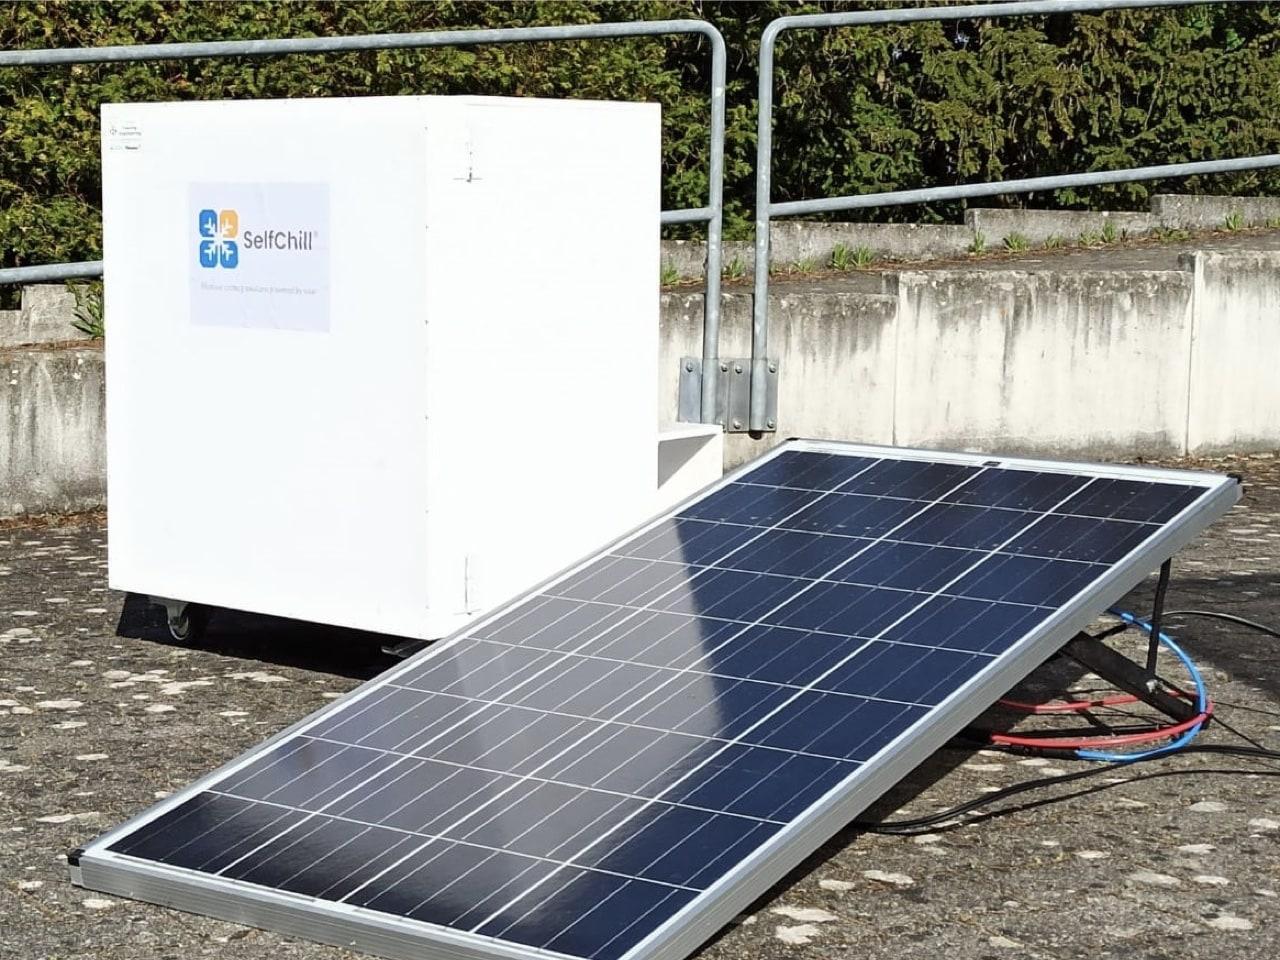 Simple set-up of the solar refrigerator working battery free.